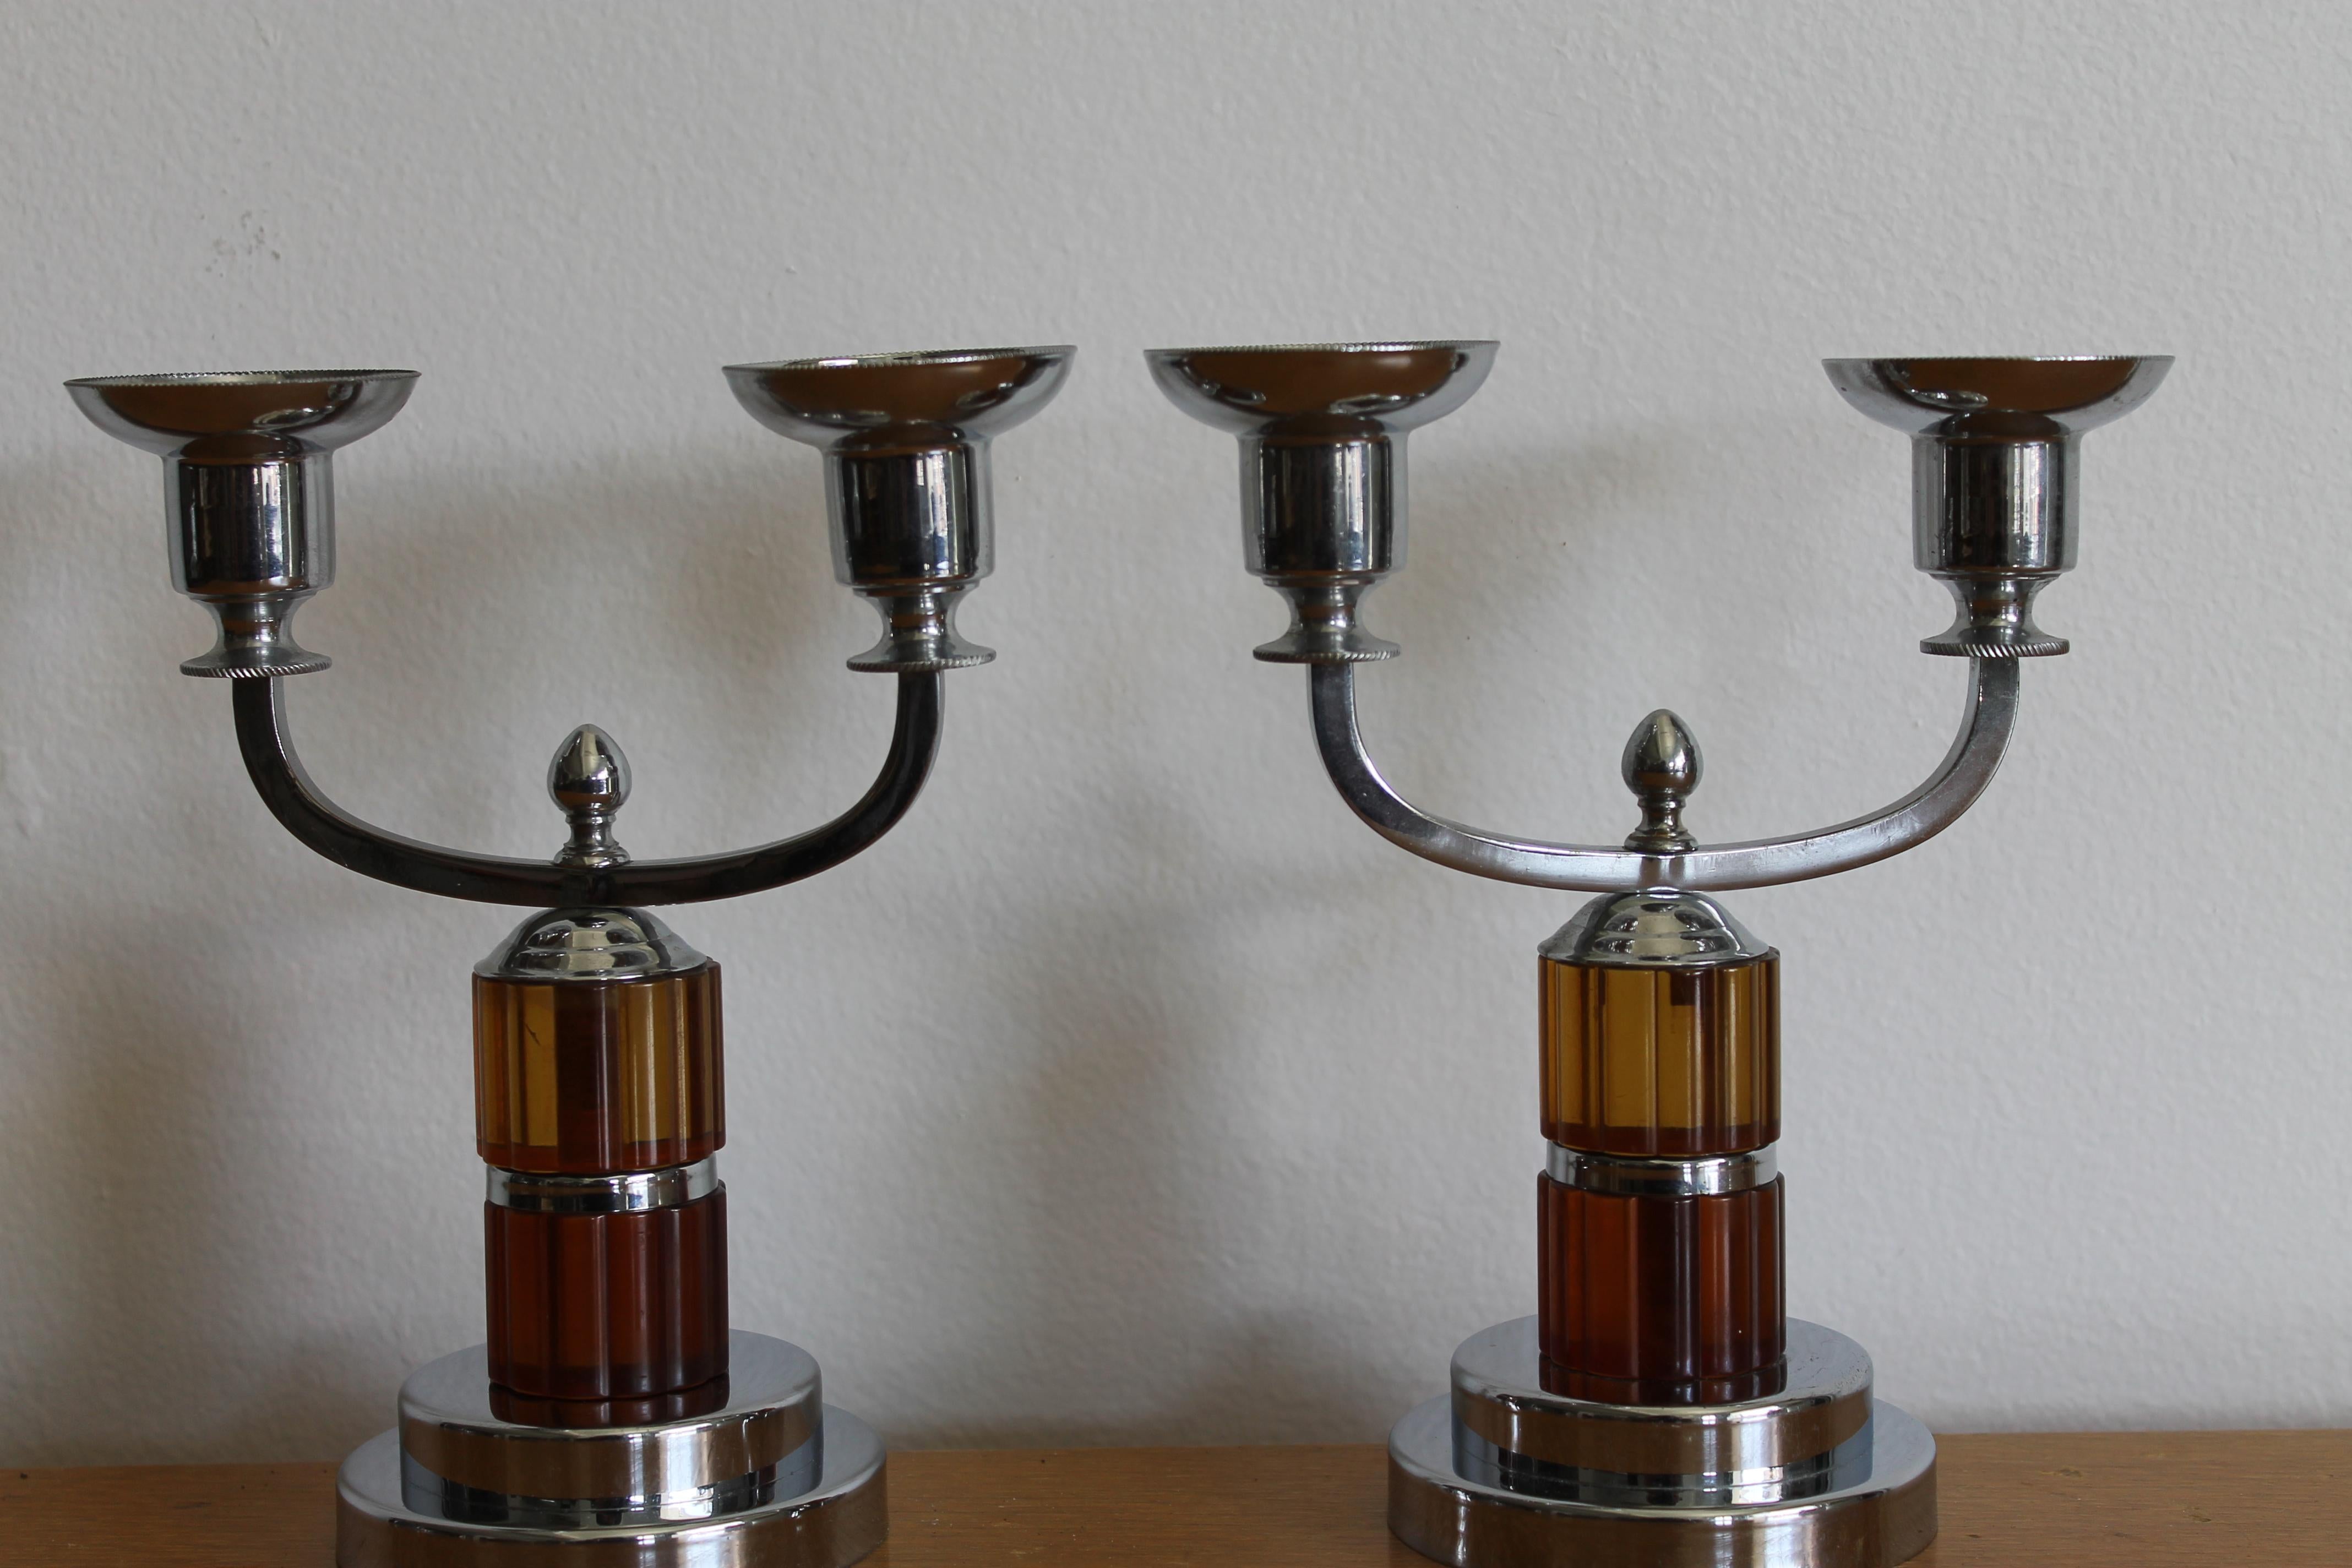 Chrome double armed candlesticks with clear Bakelite elements, one amber and one pale amber. These are marked FARBERWARE BROOKLYN NY and appear to be unused. Immaculate condition. Each candlestick measures: 6